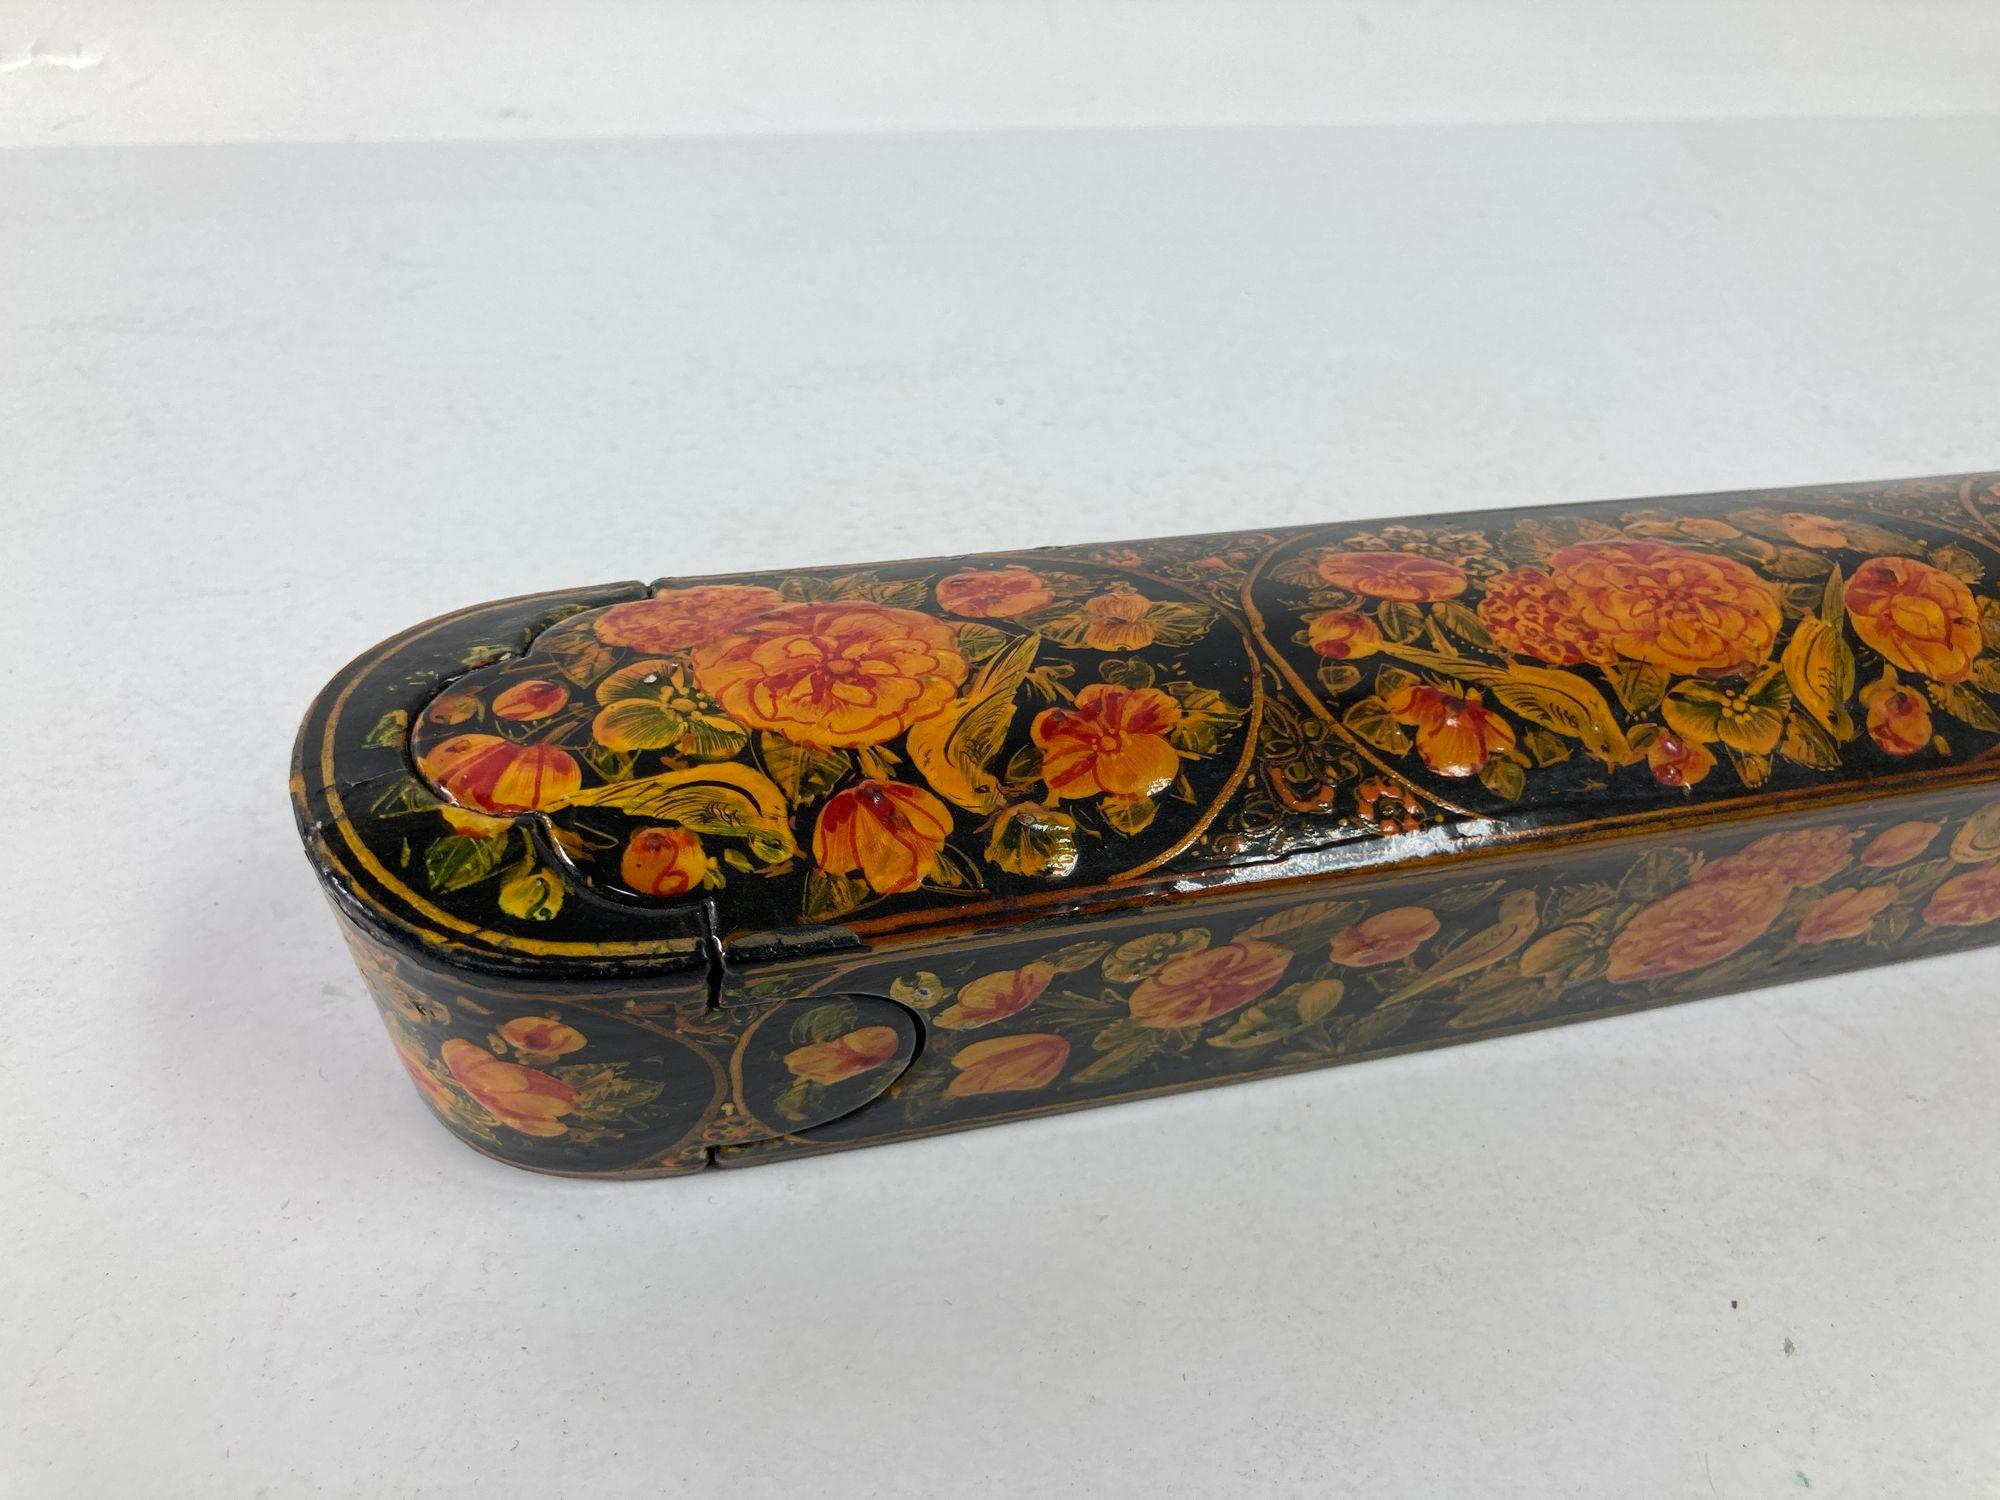 Islamic Persian Qajar Lacquer Pen Box Hand Painted with Floral and Birds Design